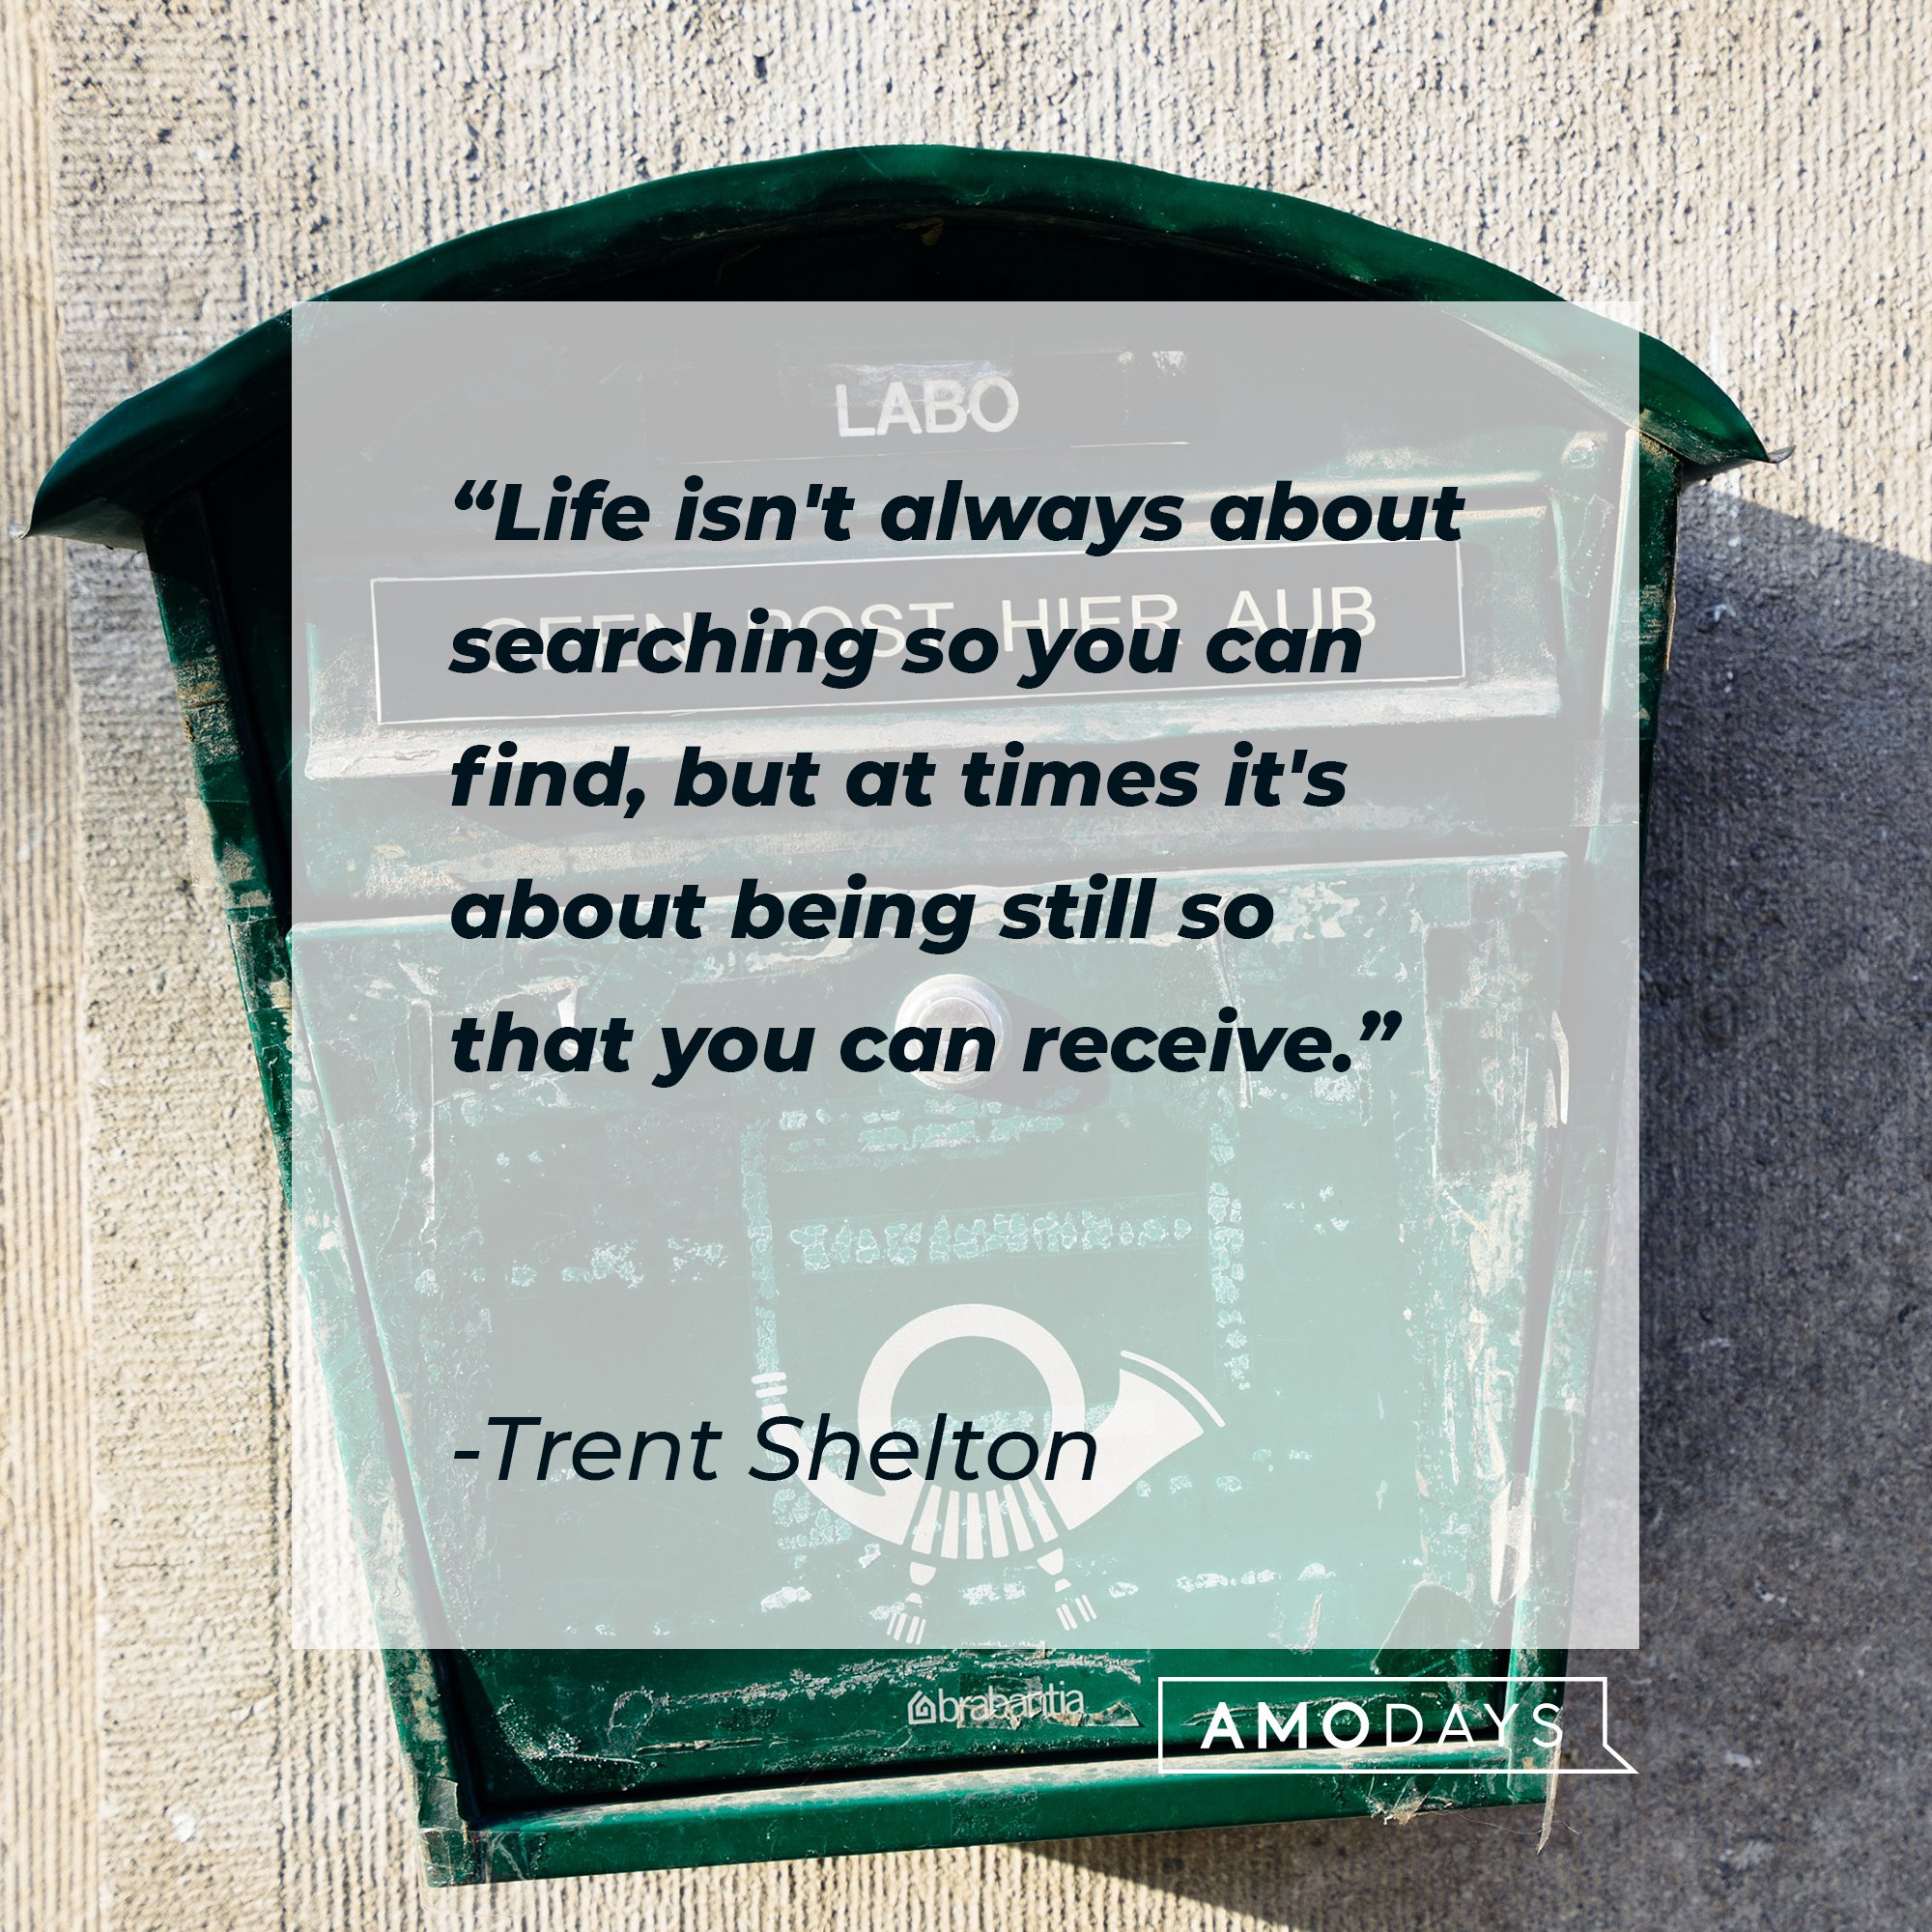 Trent Shelton's quote: "Life isn't always about searching so you can find, but at times it's about being still so that you can receive." | Image: AmoDays